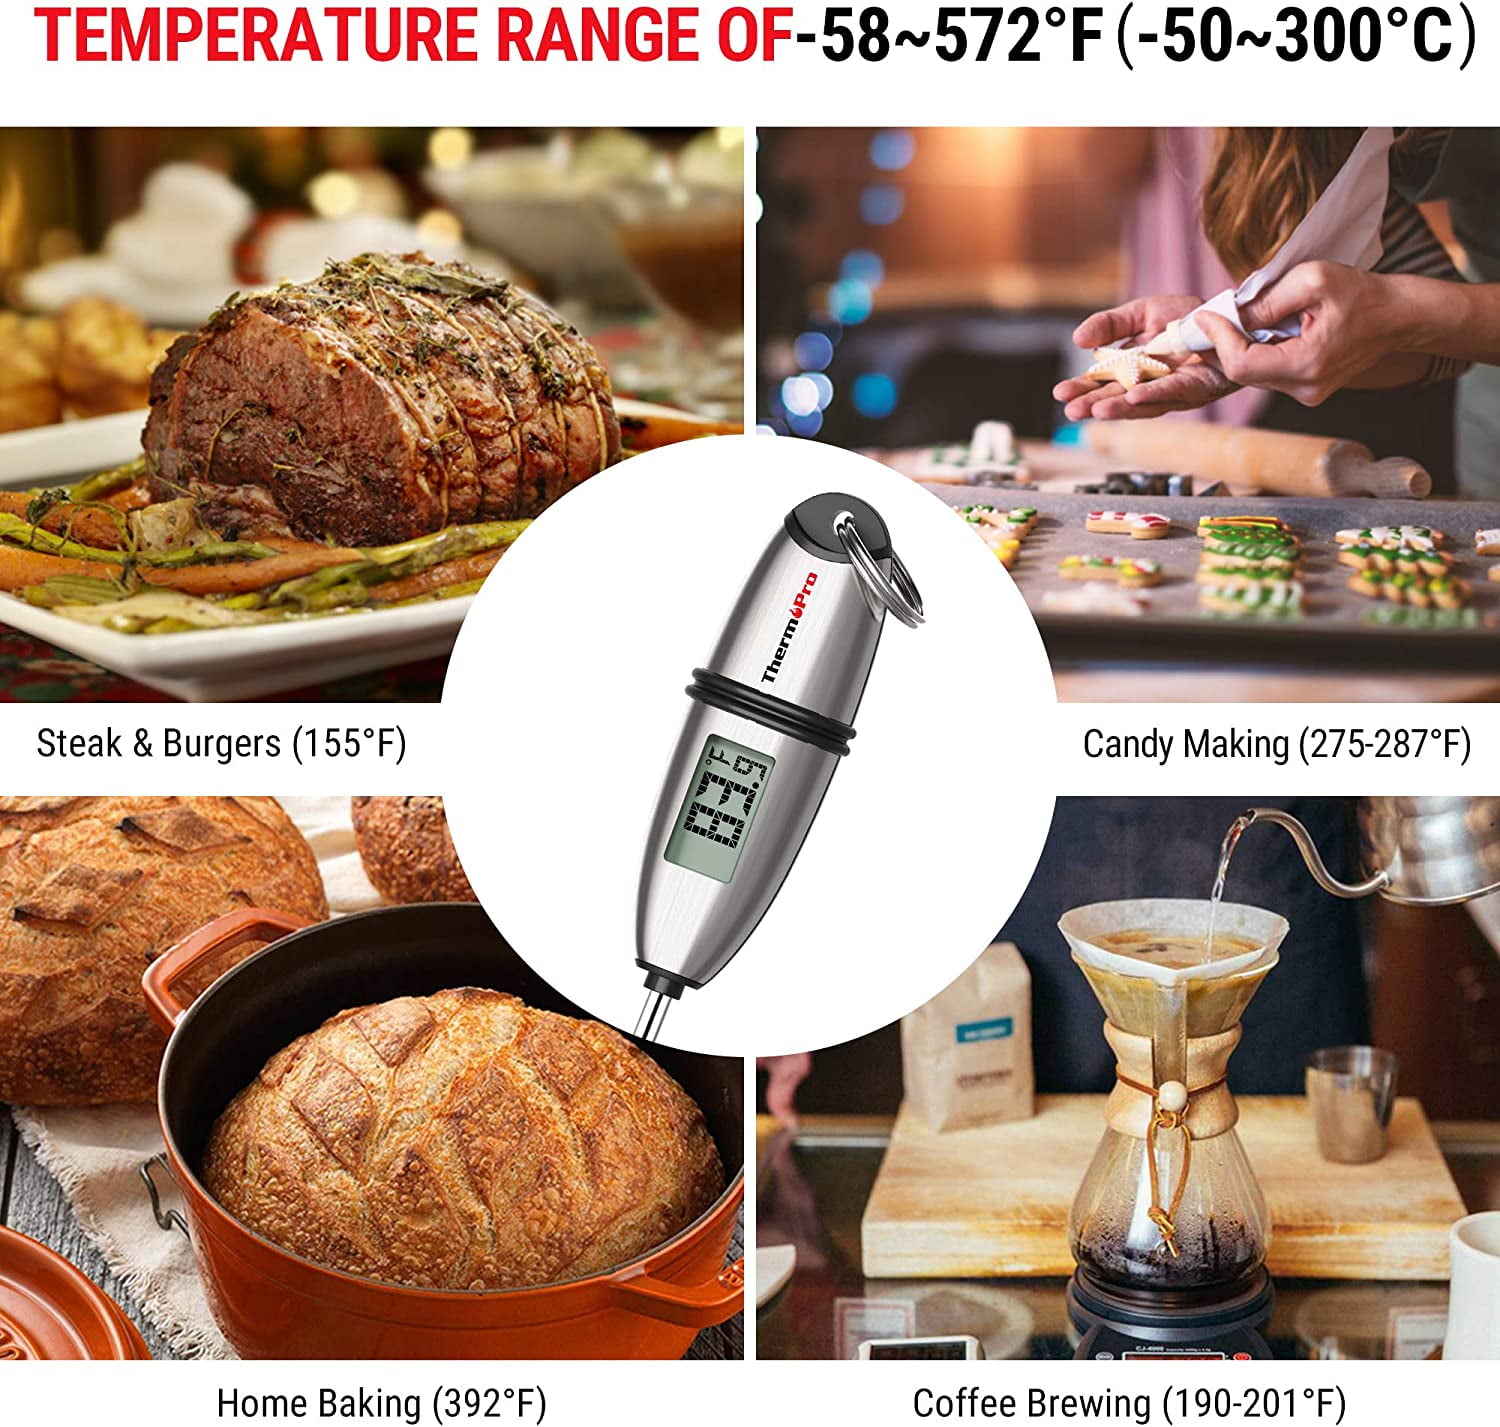  ThermoPro TP-02S Instant Read Meat Thermometer